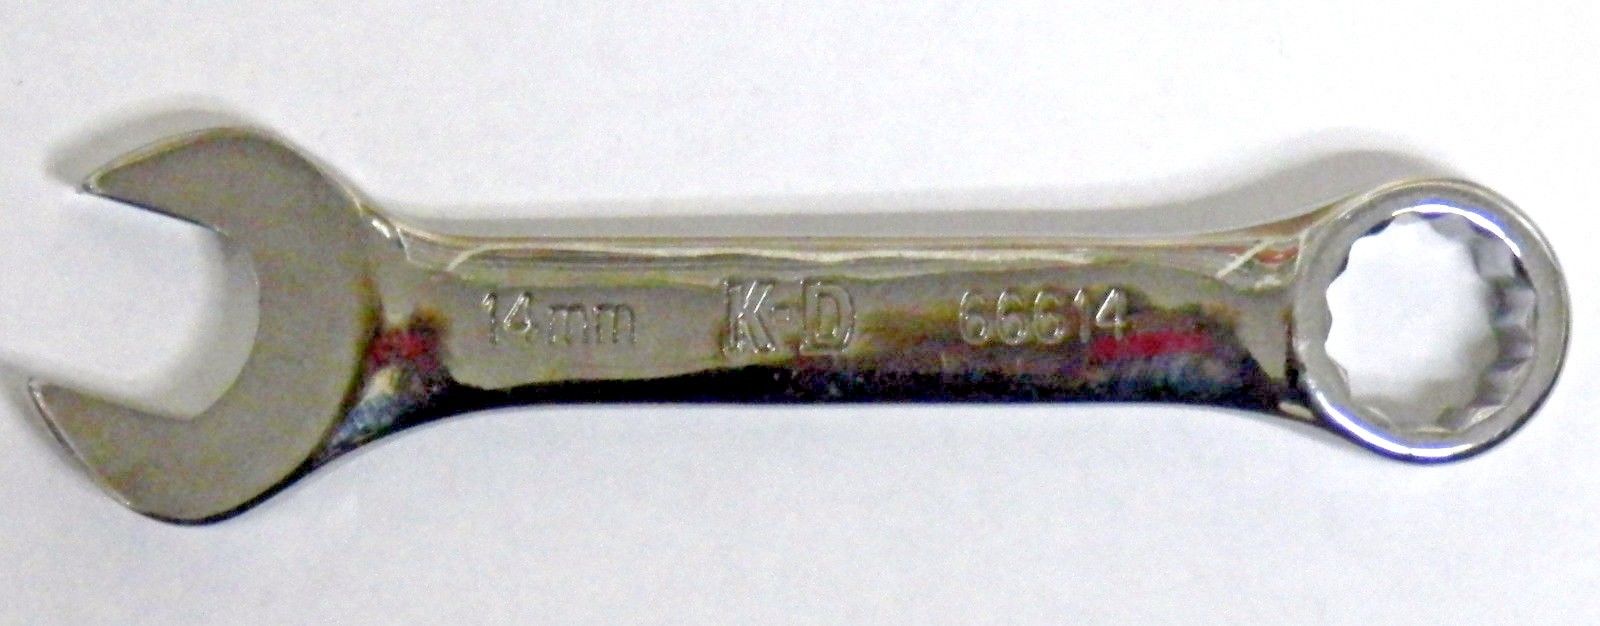 KD Tools 66614 14mm 12 Point Stubby Combination Wrench USA